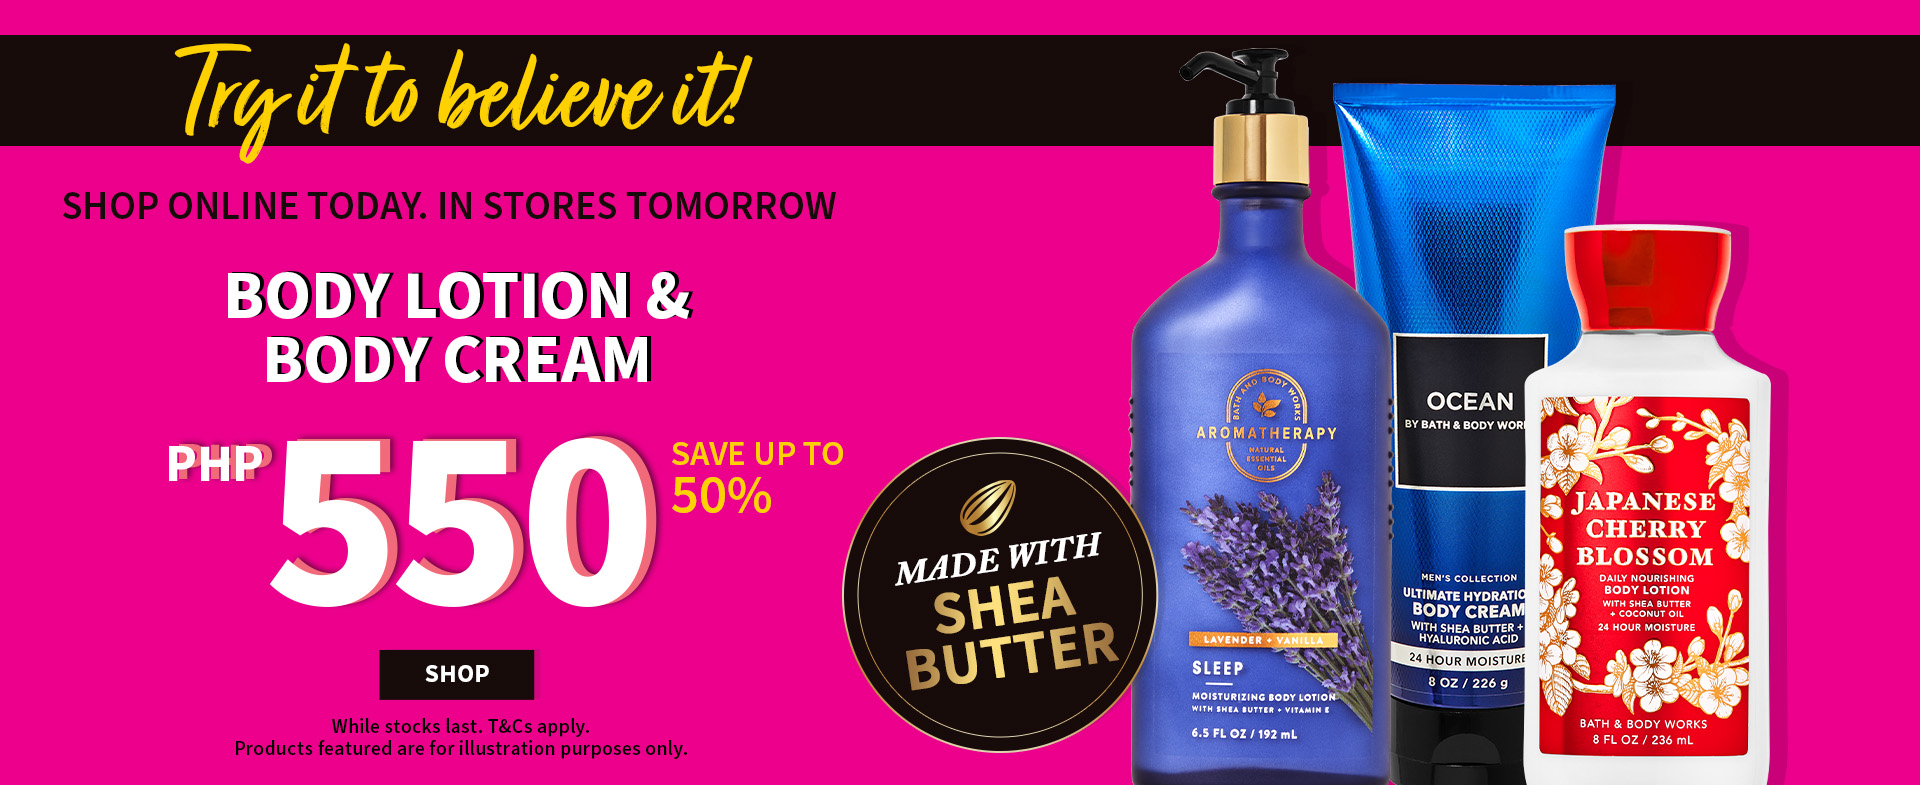 Try It To Believe It This Weekend Only! Body Lotion And Body Cream